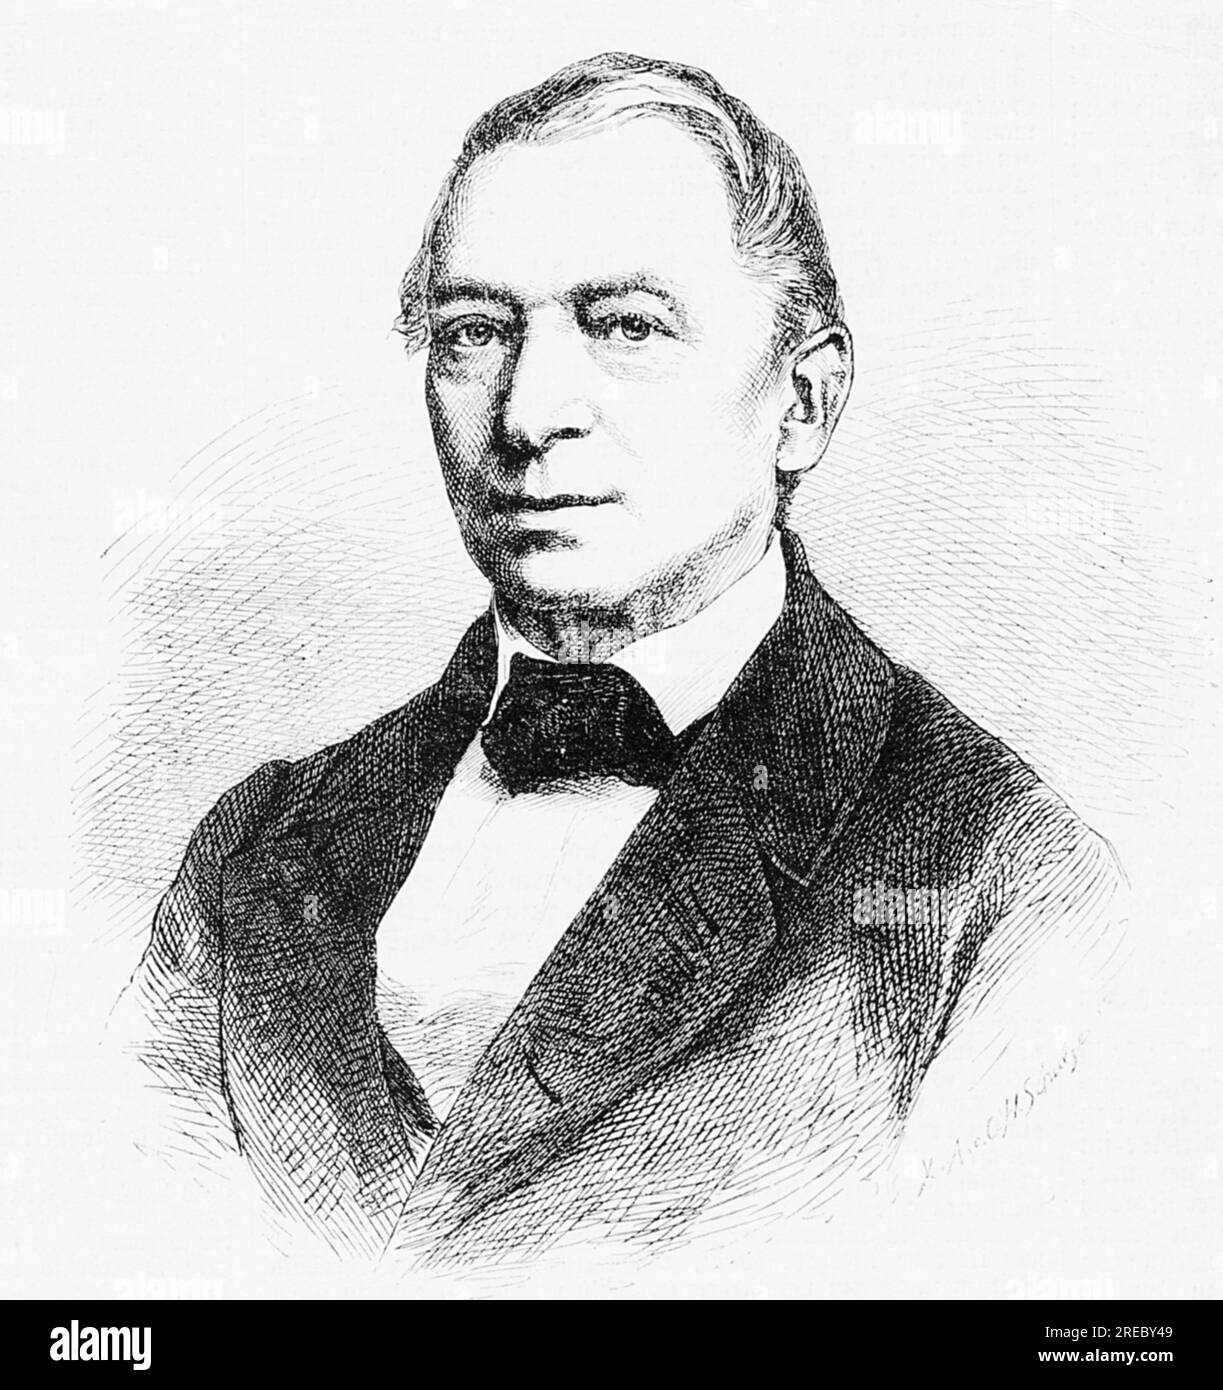 Weckherlin, August von, 8.3.1794 - 18.12.1868, German agronomist and domain administrator, ADDITIONAL-RIGHTS-CLEARANCE-INFO-NOT-AVAILABLE Stock Photo